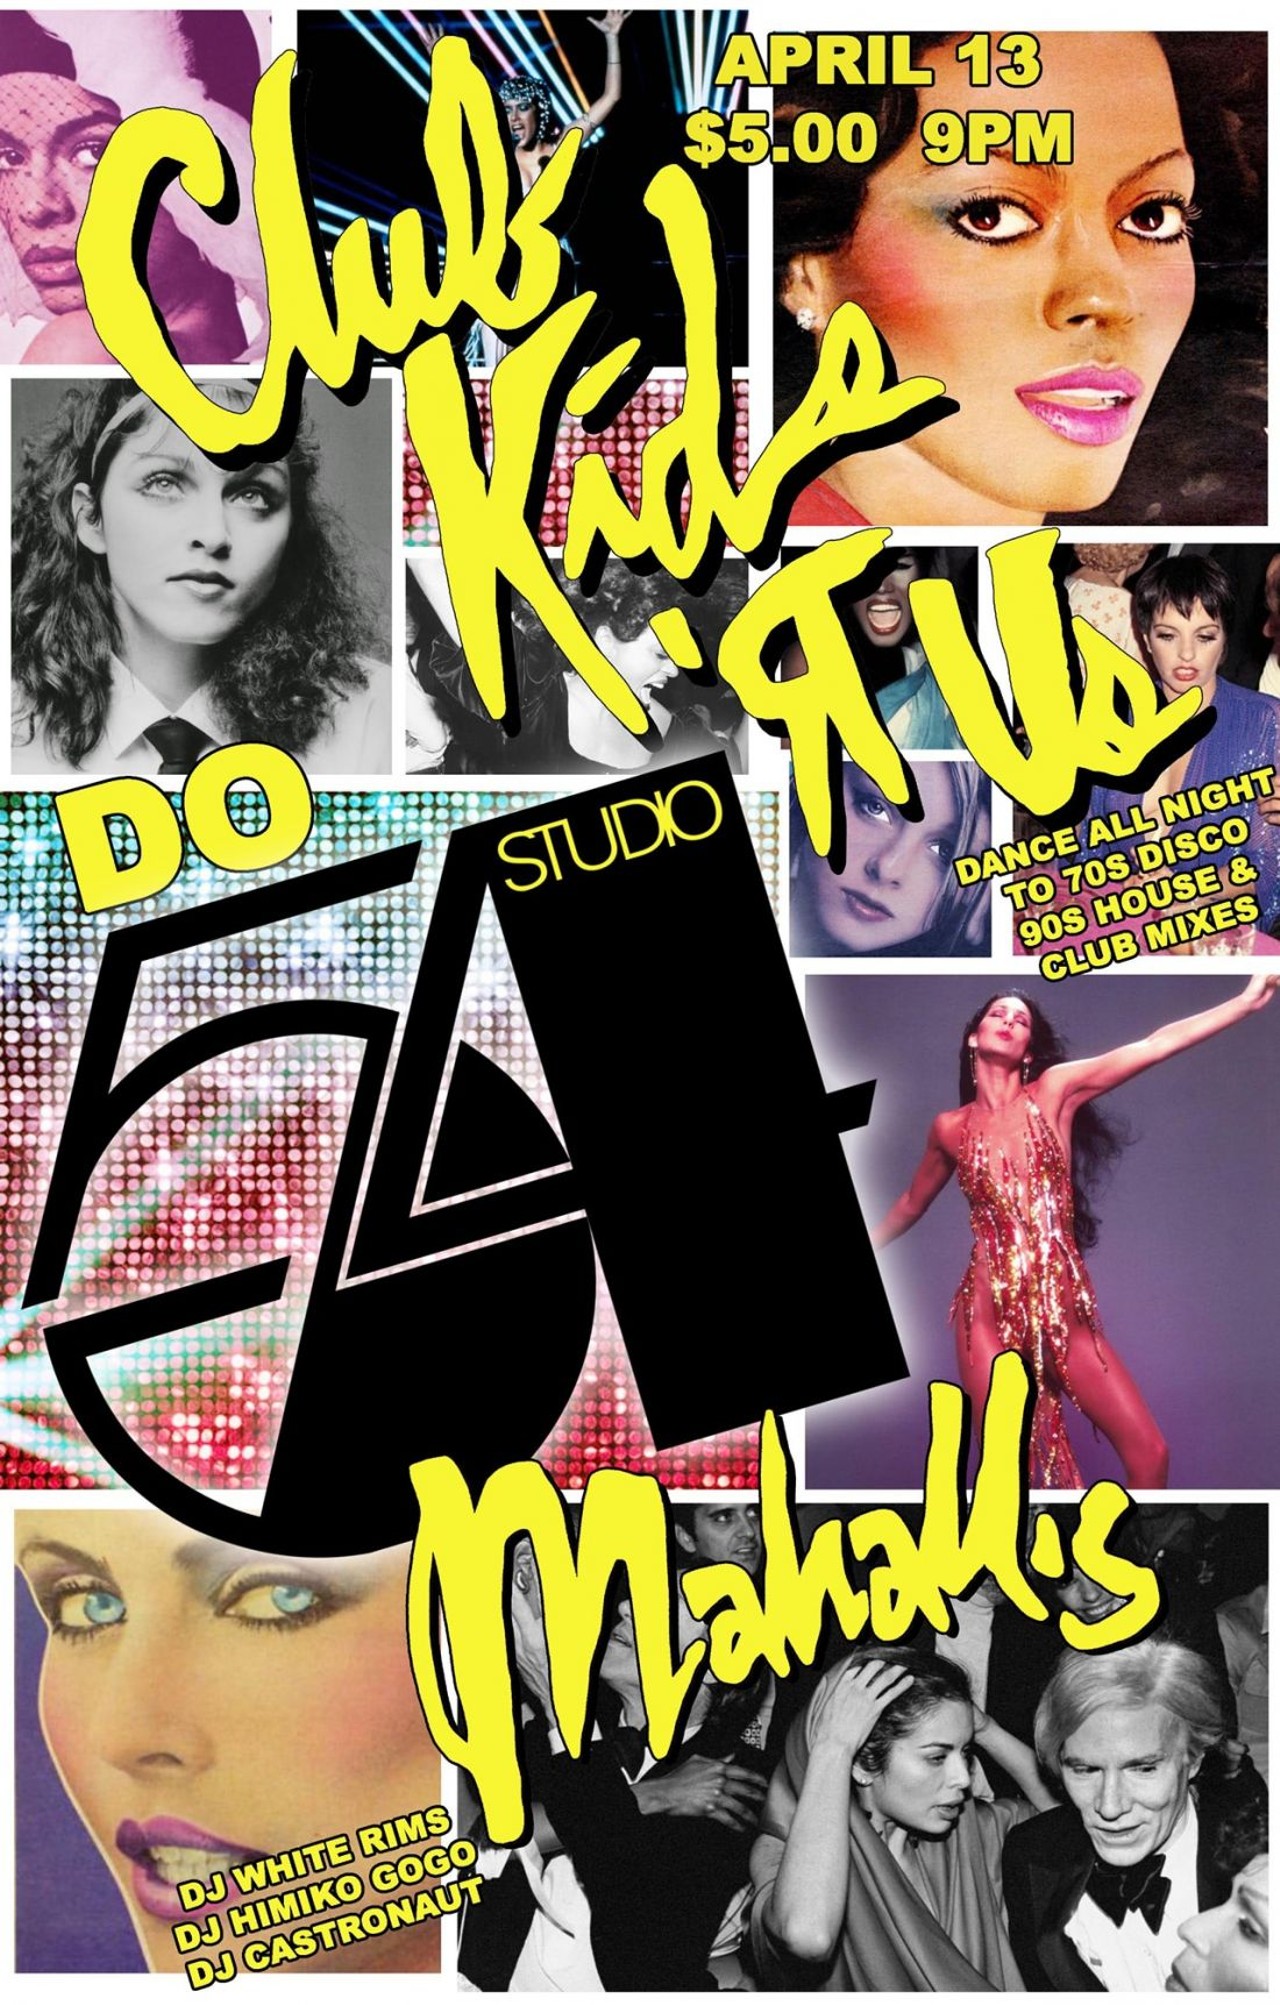 Studio 54 / '90s Club Kidz Party  
Sat, April 13
Poster Artwork Provided by Mahall's